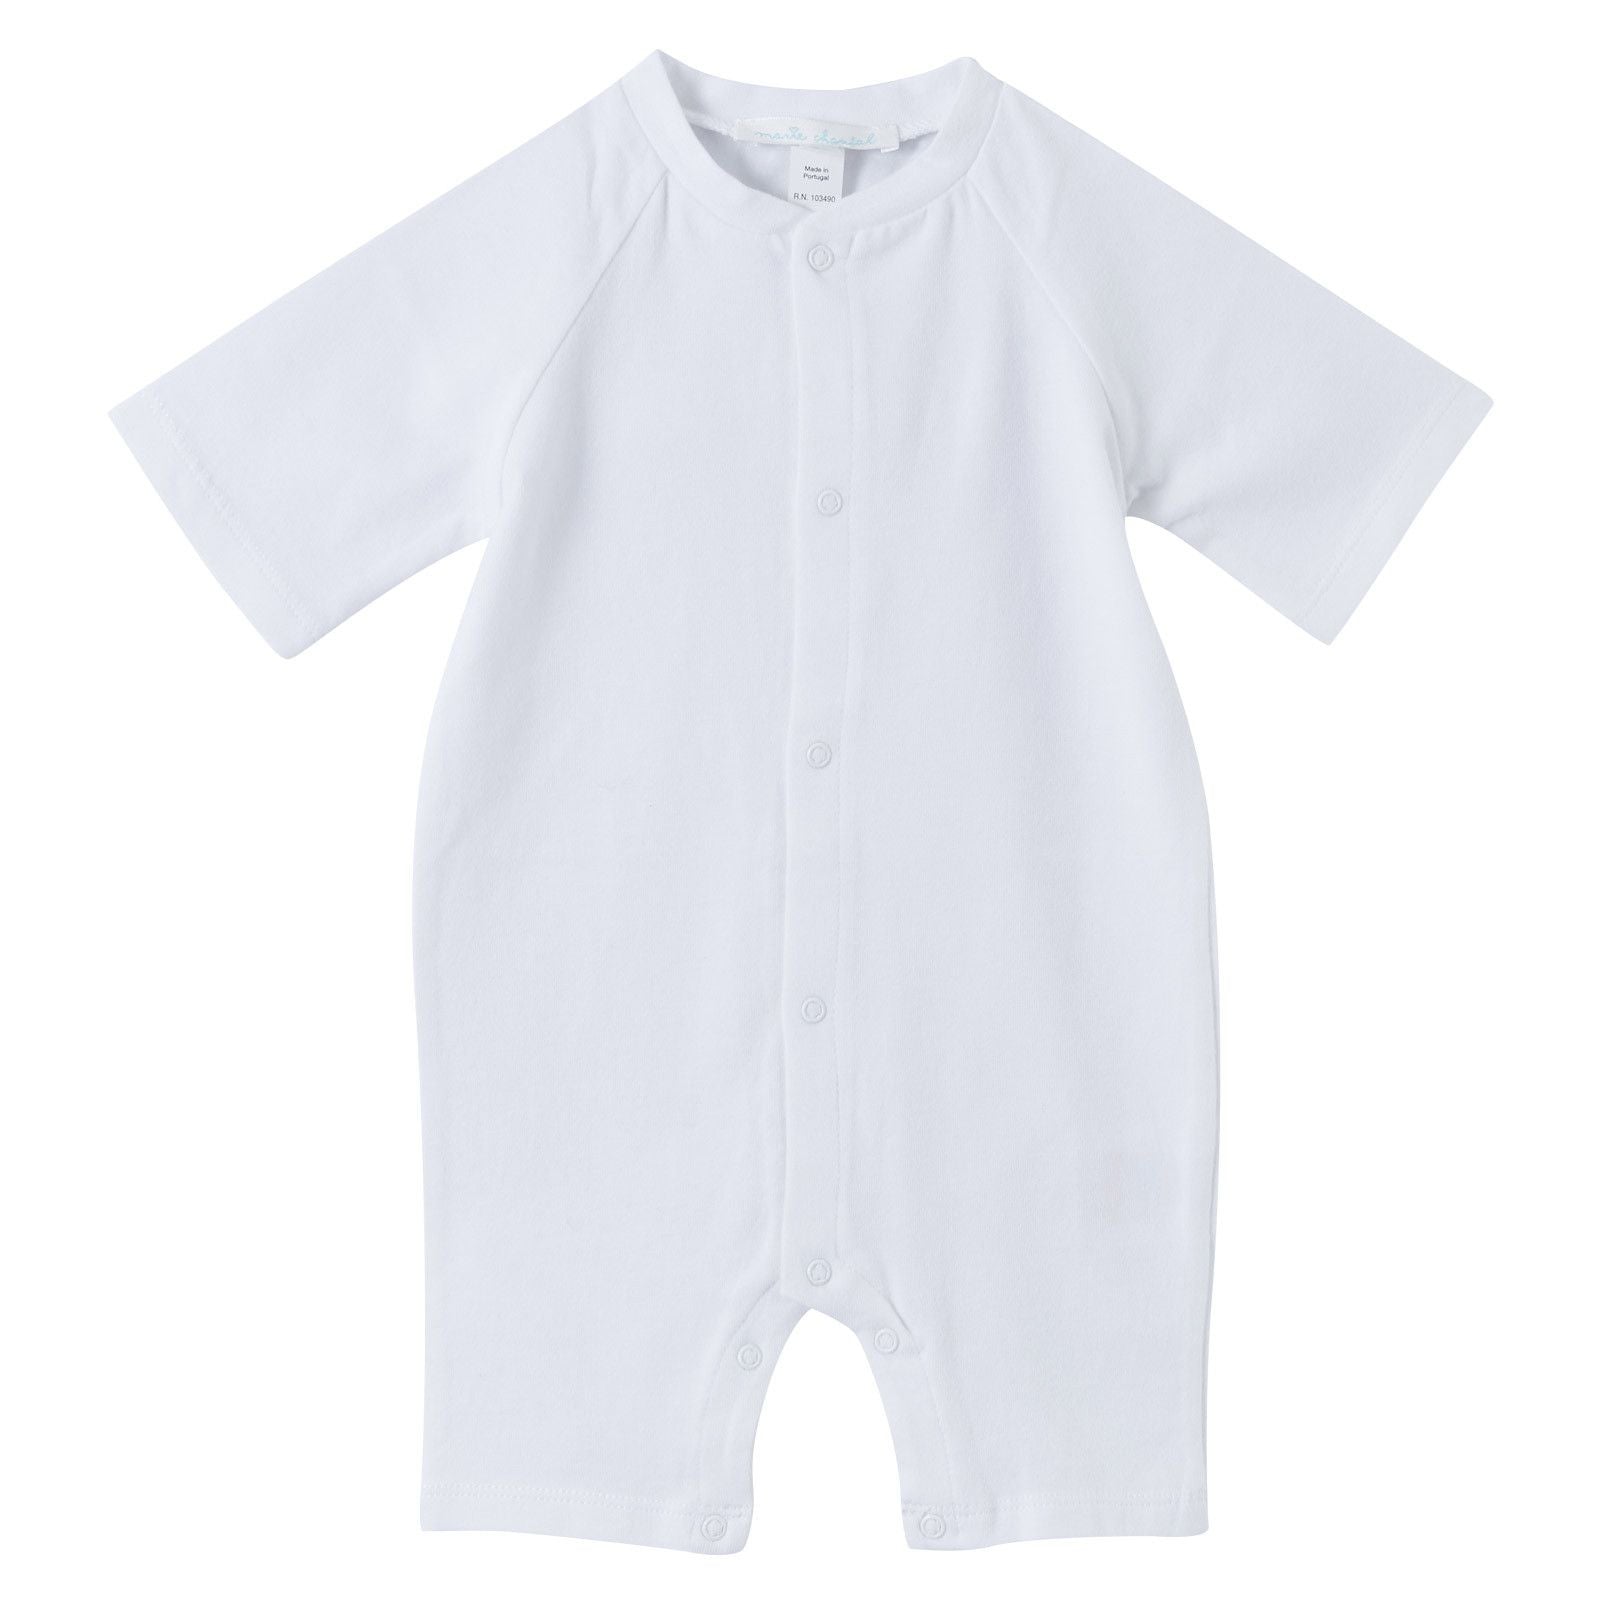 Baby White Cotton Babygrow With Angel Wings - CÉMAROSE | Children's Fashion Store - 1